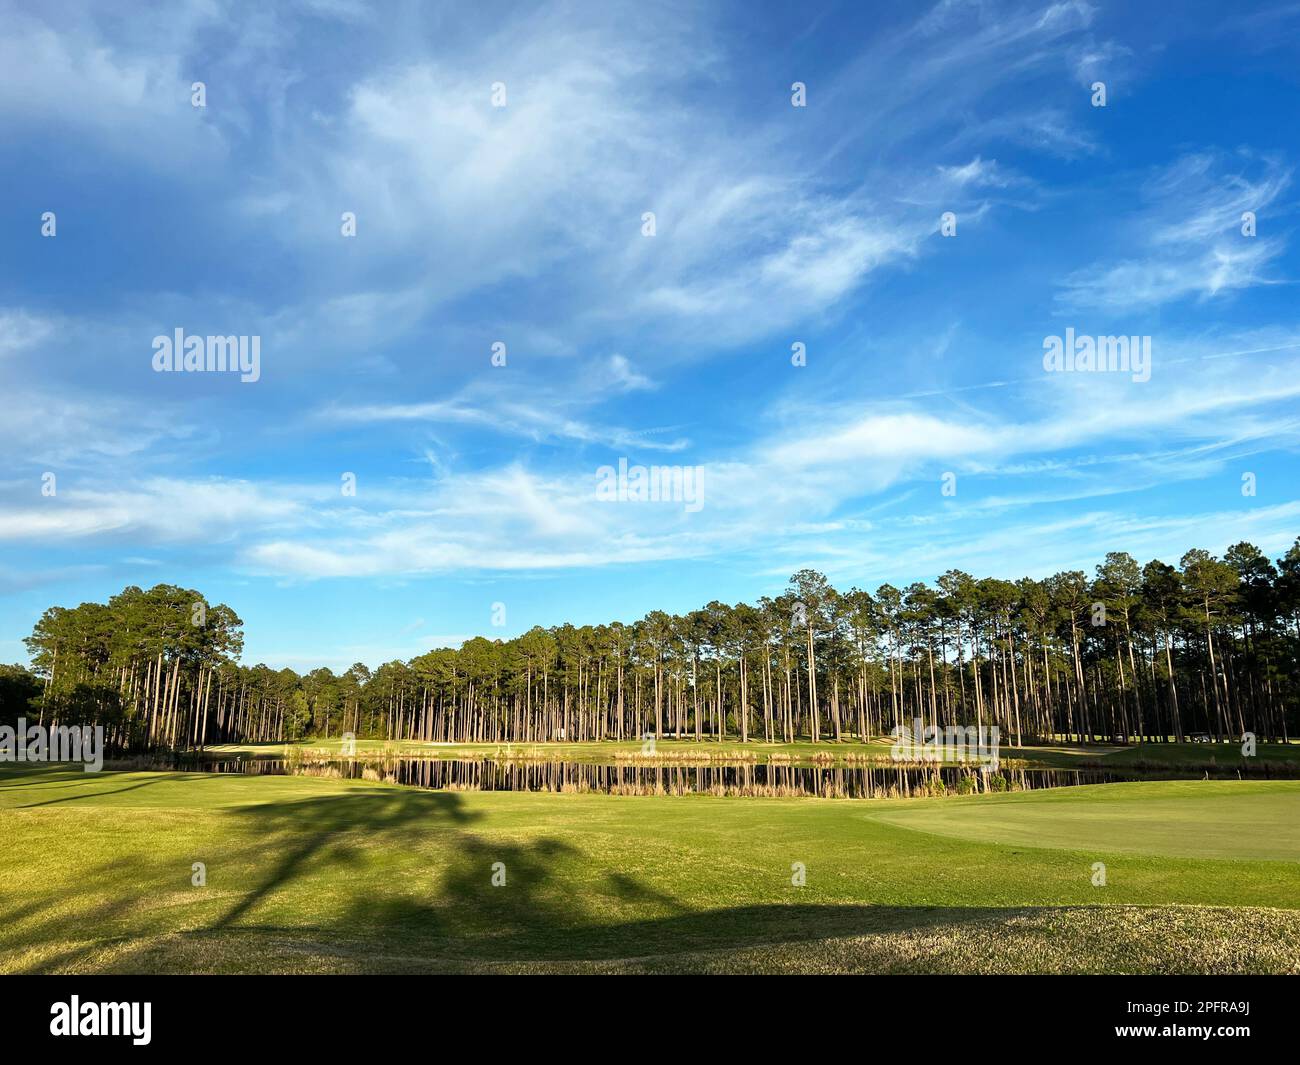 The golden hour at a Georgia State Park golf course, a popular golf destination in the southern United States. Stock Photo